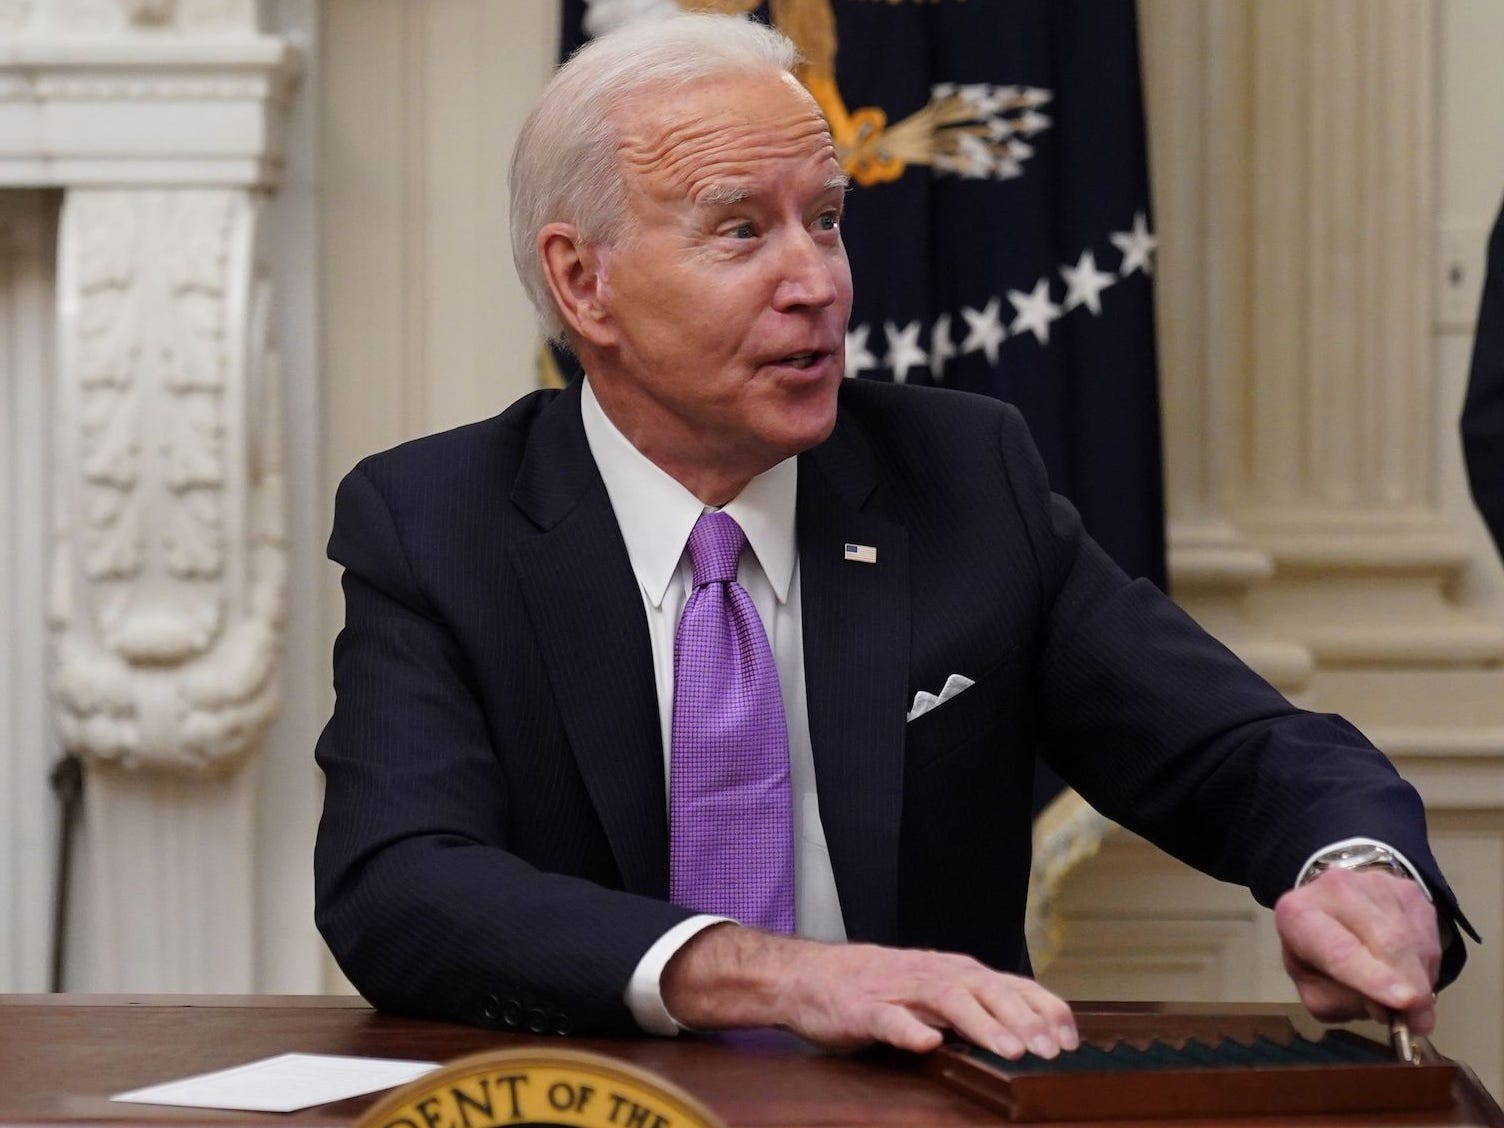 Emails point to how Biden appointees greeted demoralized workers at federal agencies: ‘These last 4 years own tested our faith in our authorities.’